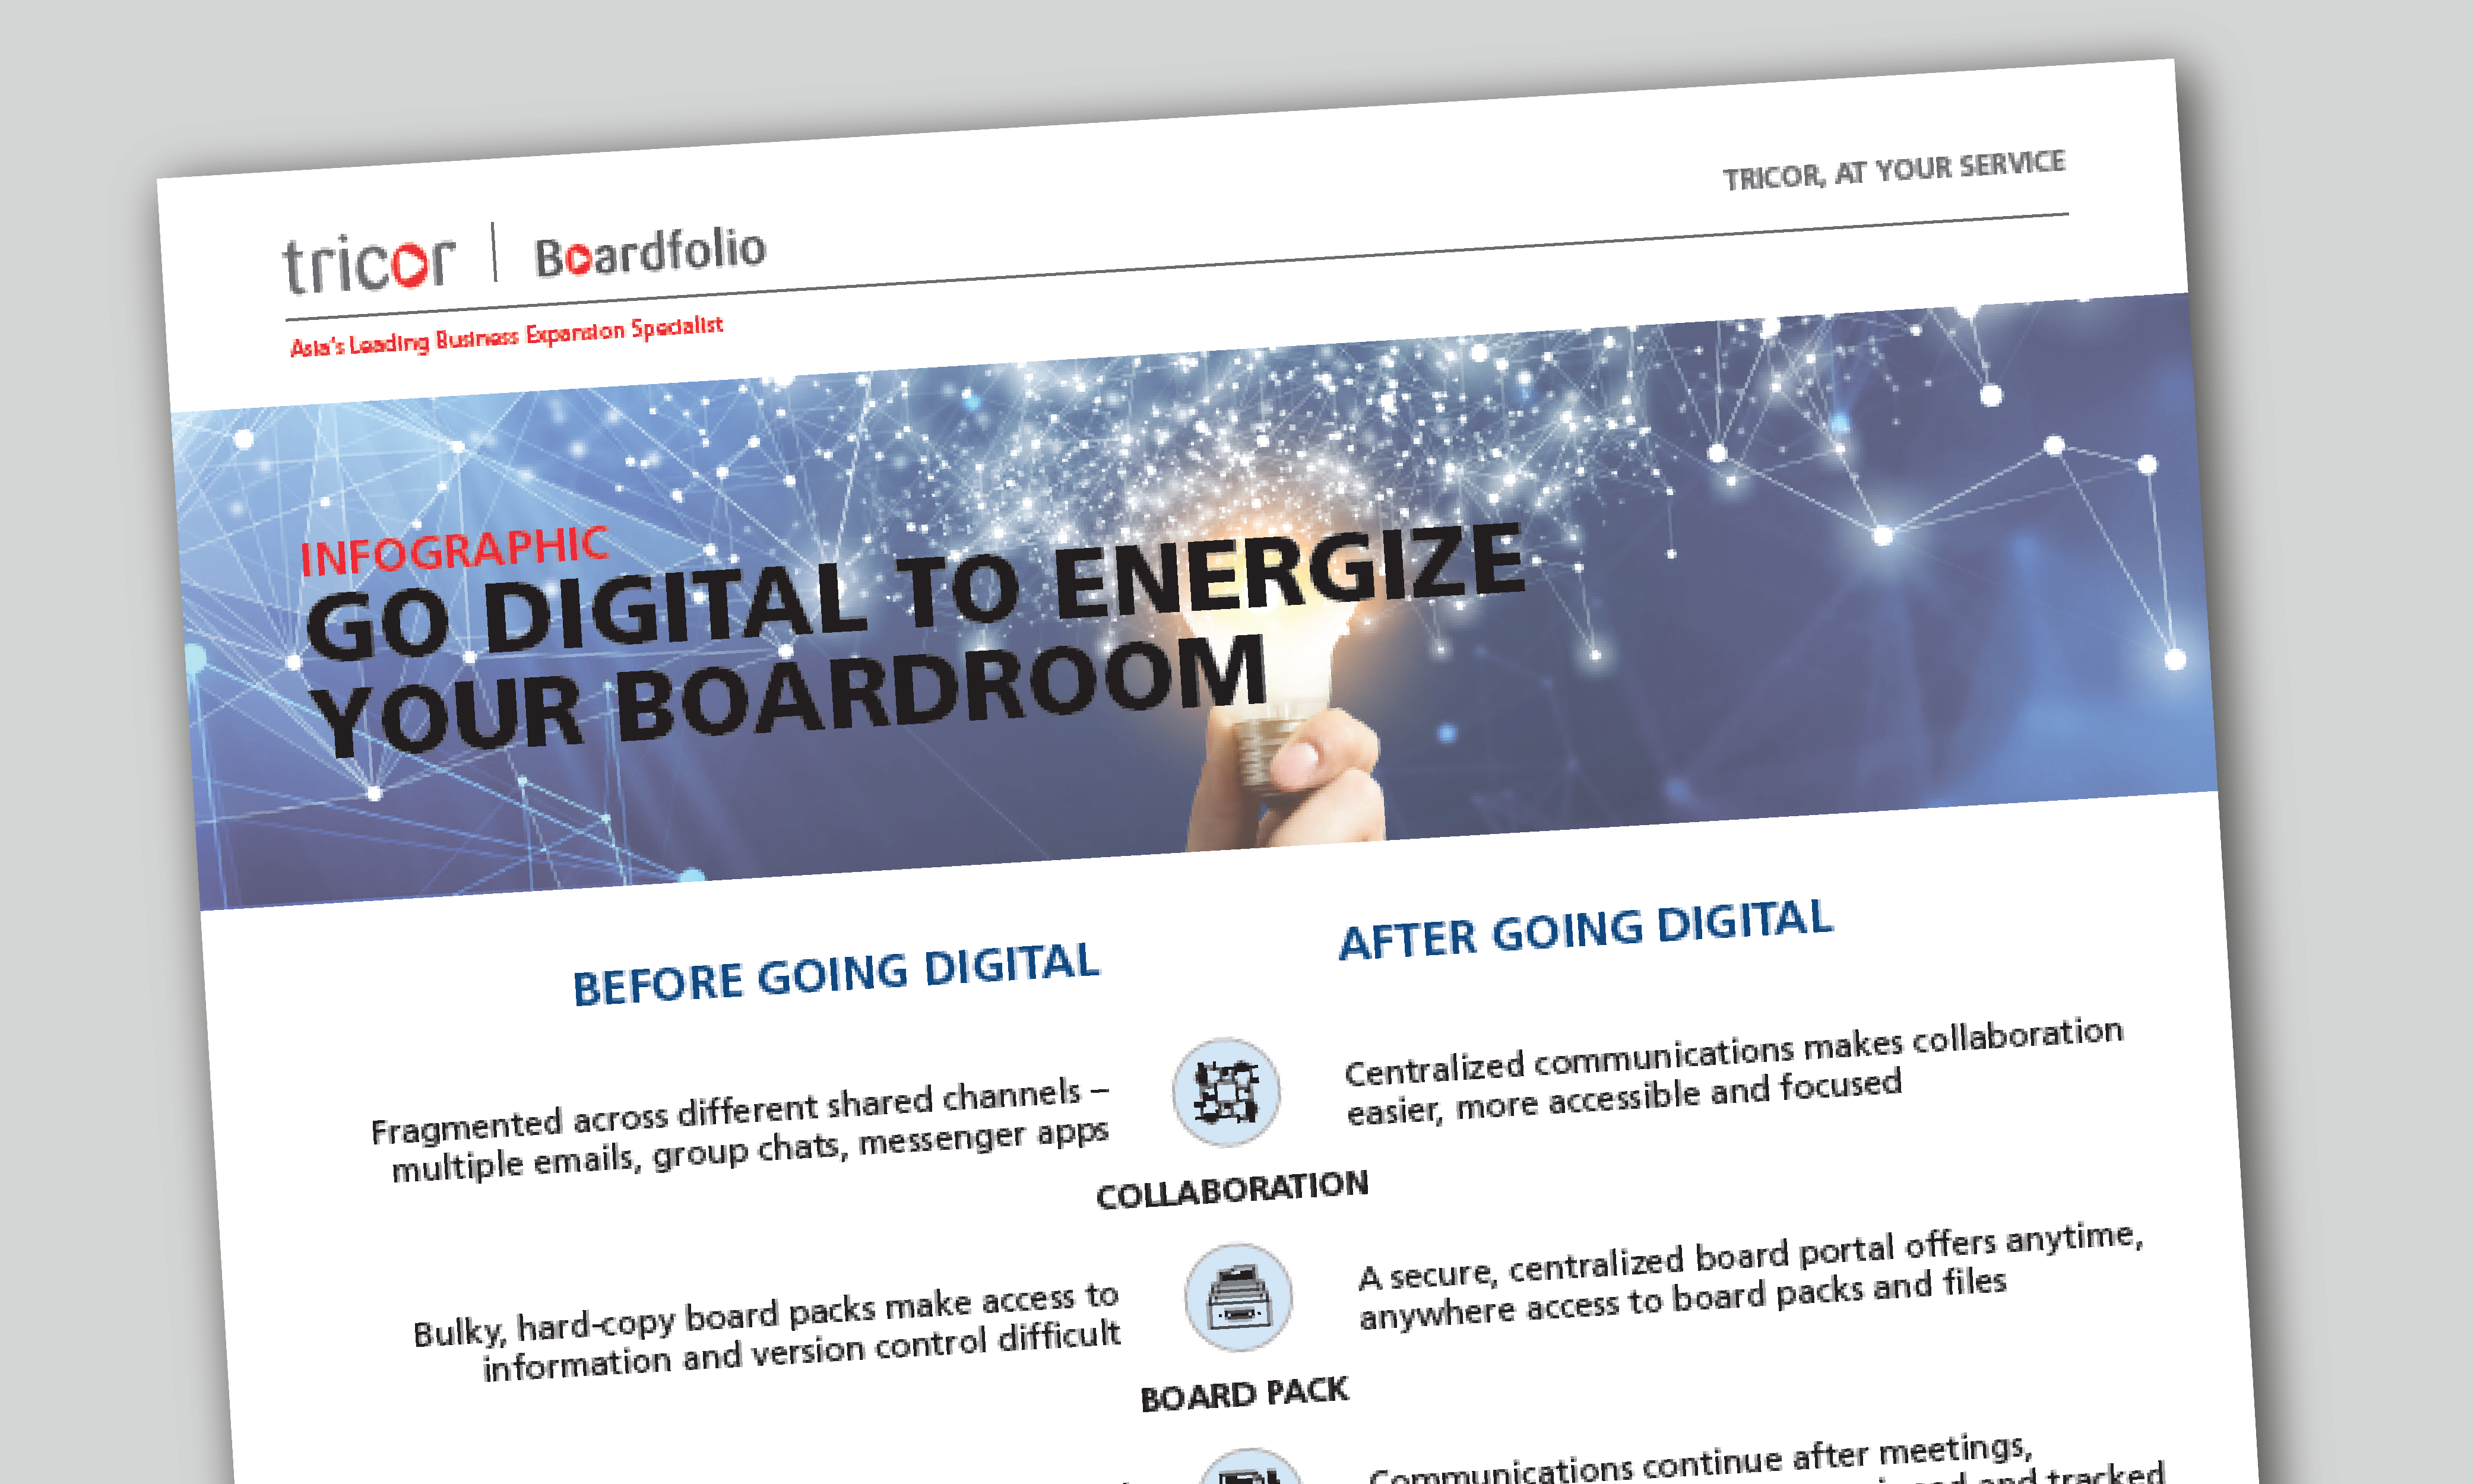 Go Digital To Energize Your Boardroom Infographic